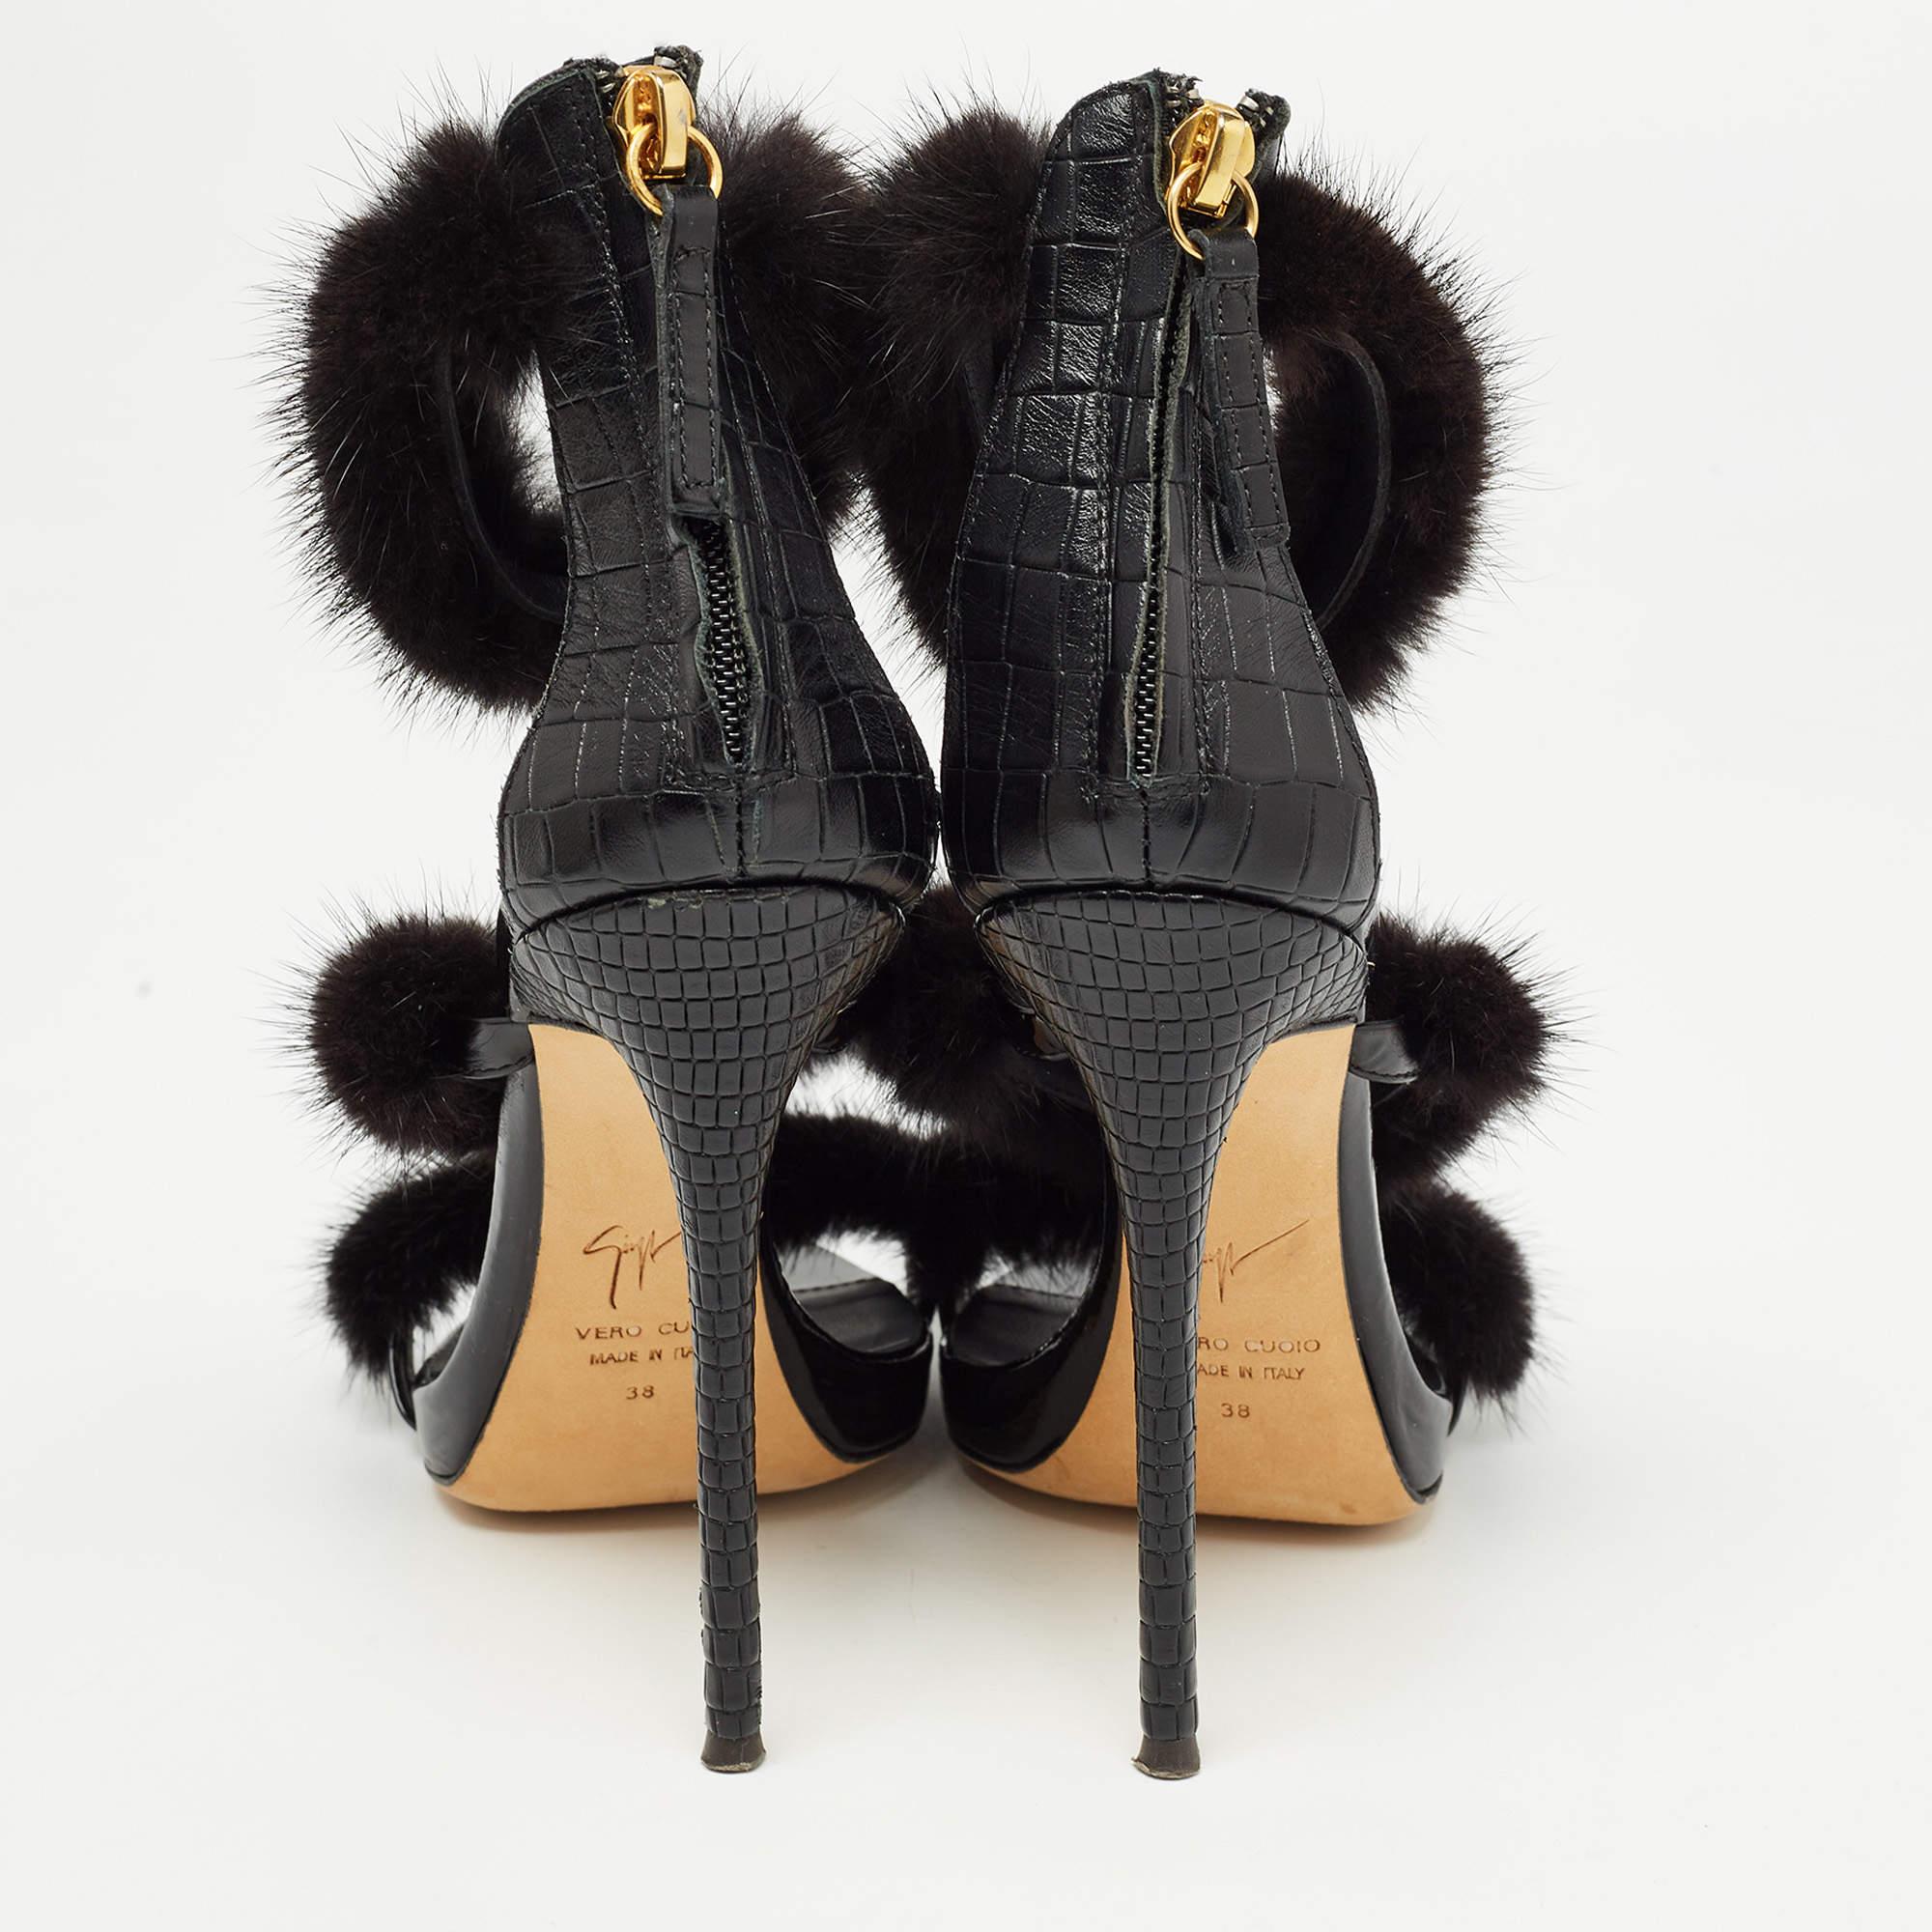 Giuseppe Zanotti Black Croc Embossed and Fur Harmony Ankle Strap Sandals Size 38 For Sale 3